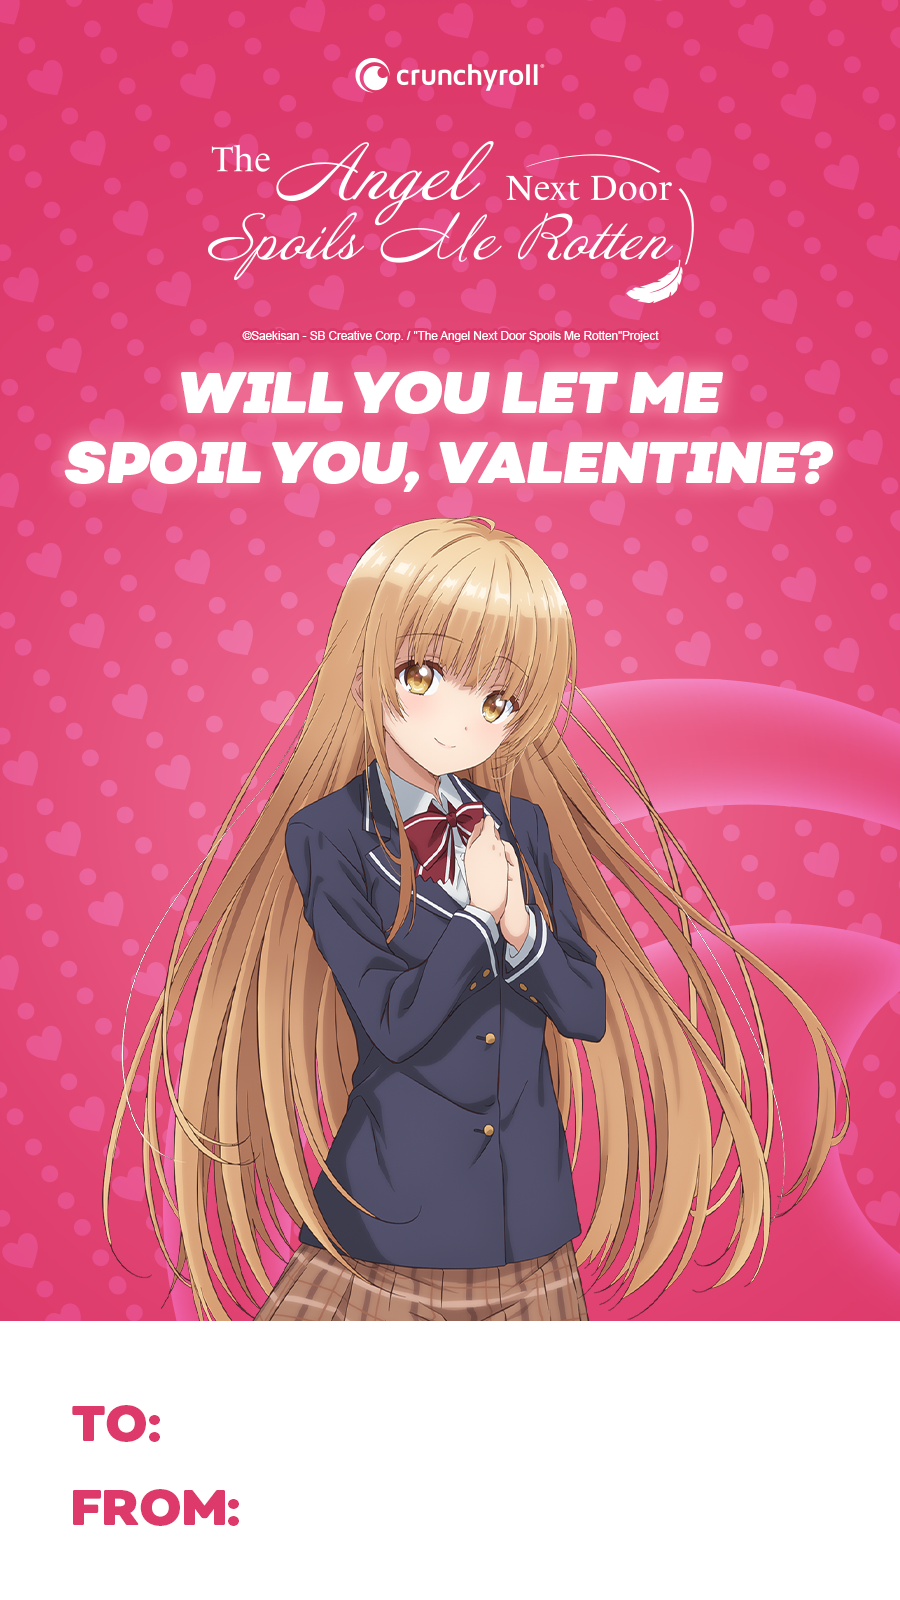 FEATURE: 20 Anime Valentine's Day Cards to Celebrate the Ones You Love